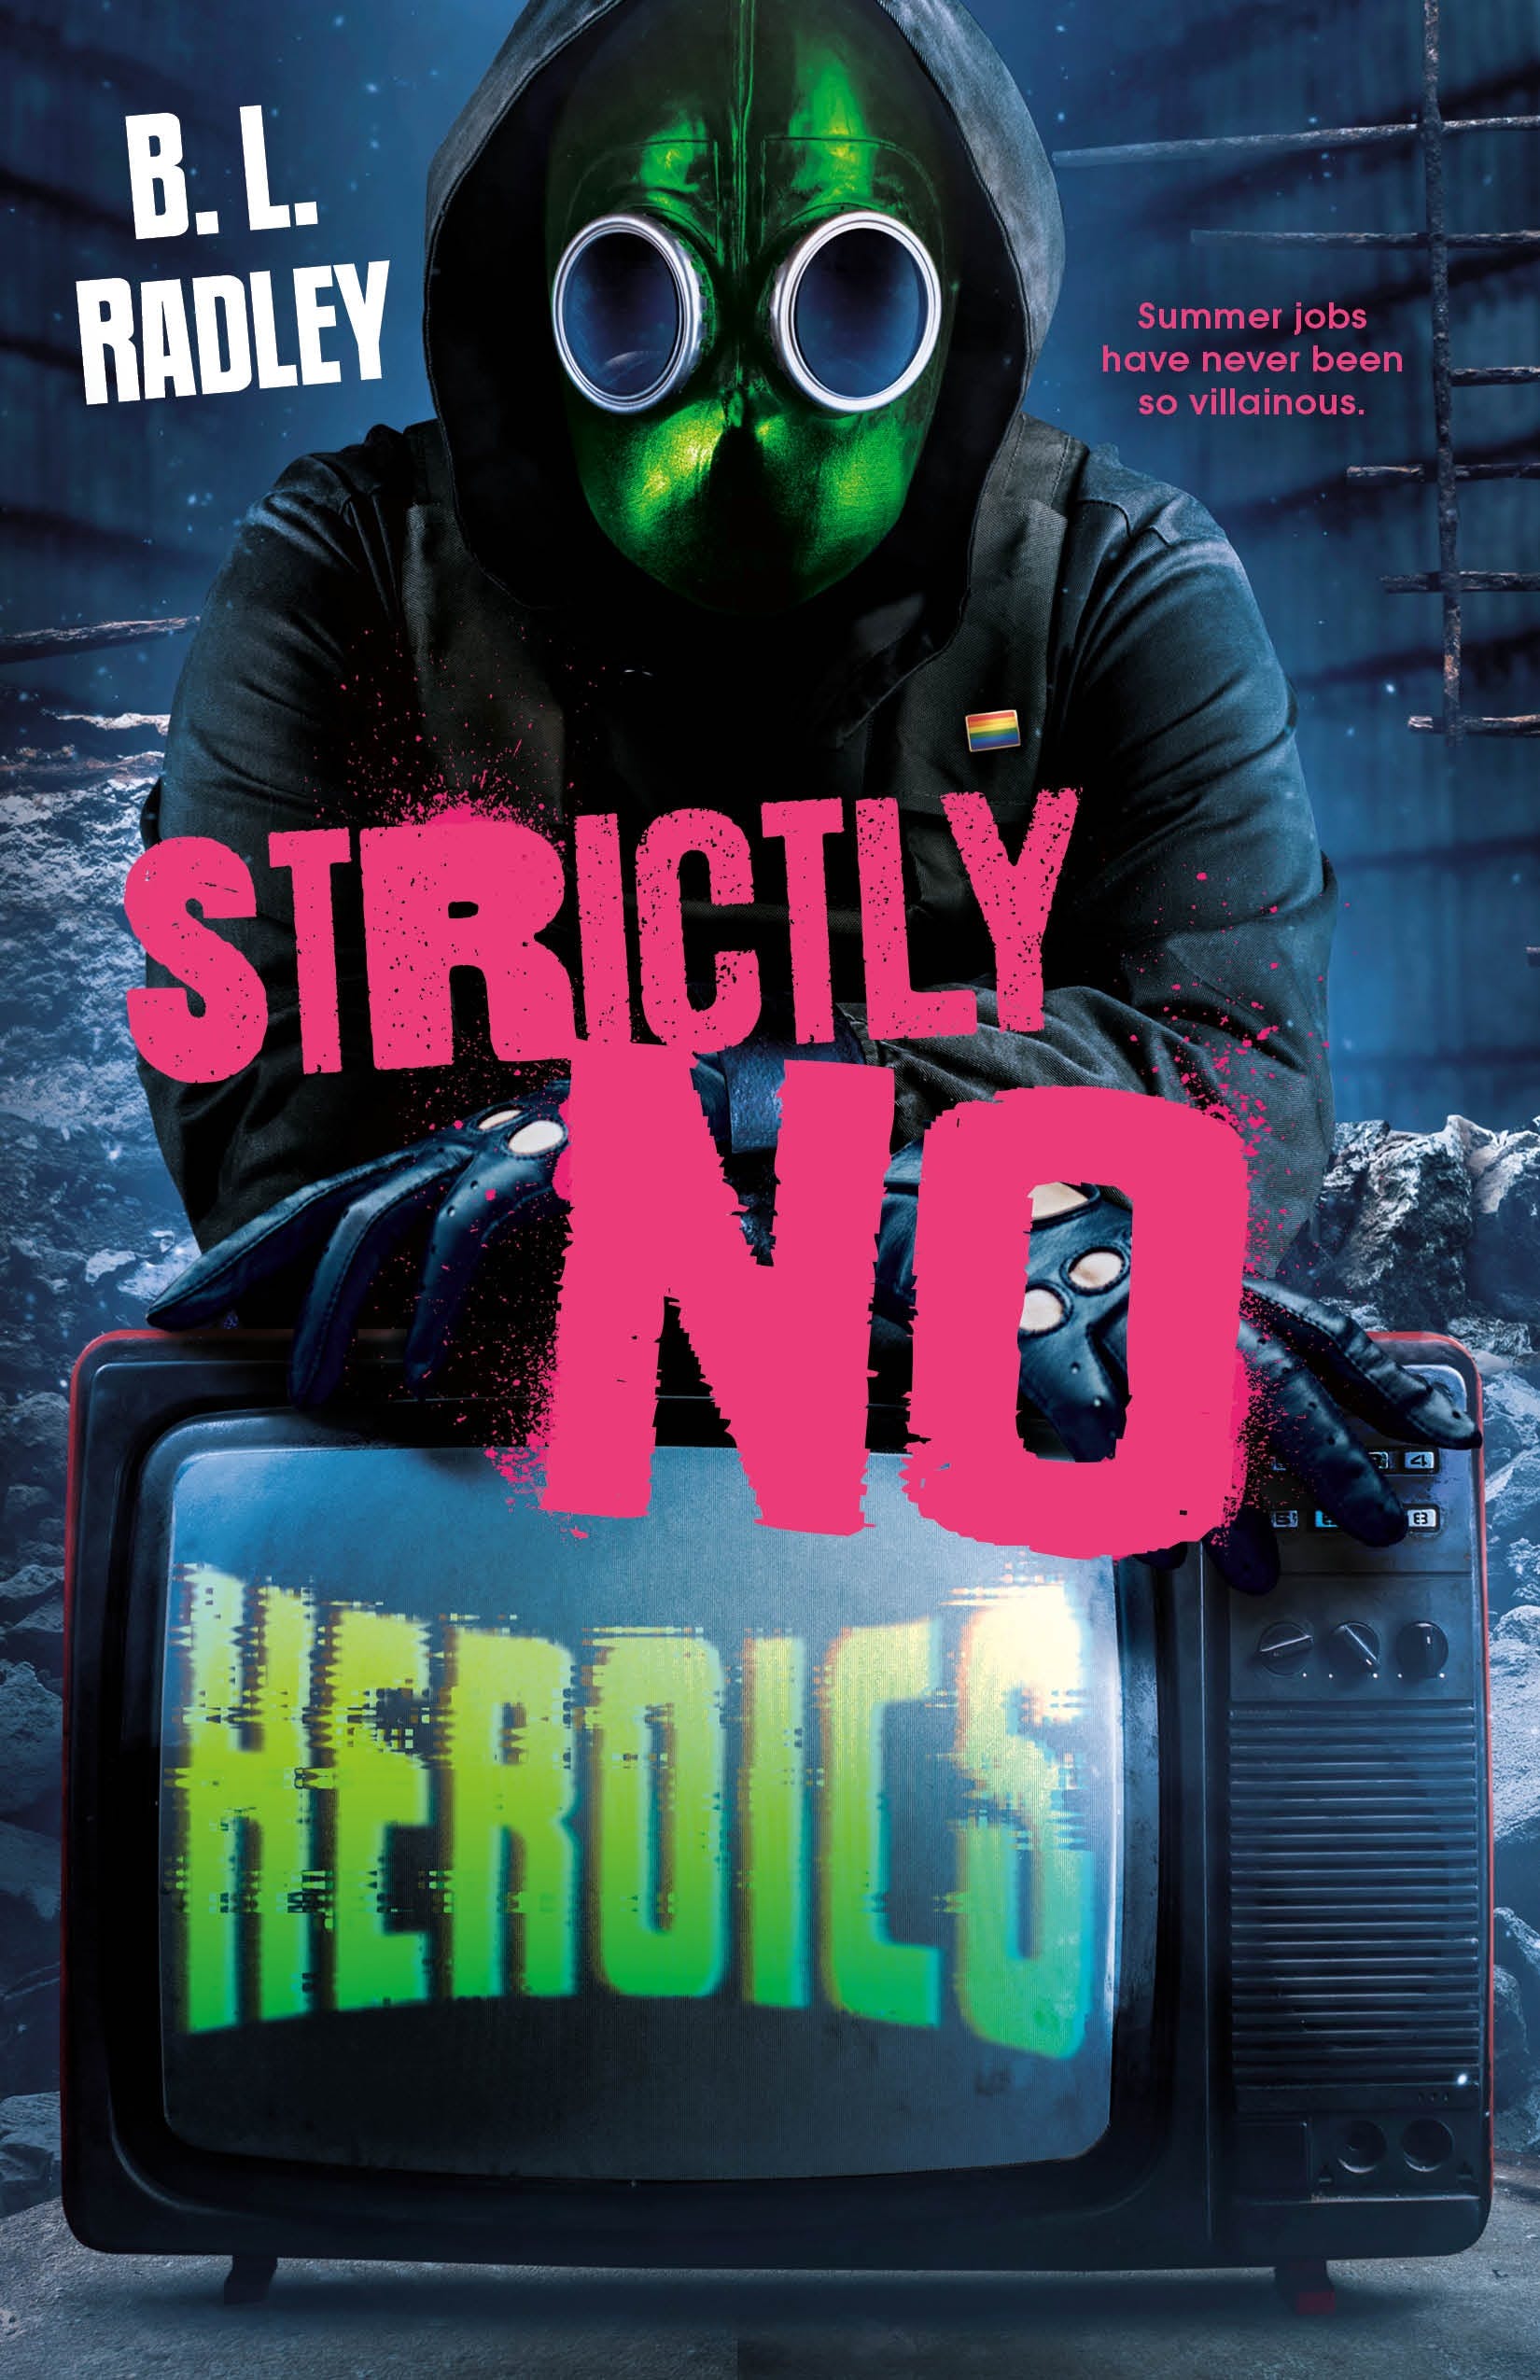 Cover of Strictly No Heroics, featuring a figure in a green mask, hoodie, and goggles sitting behind an old-school tube TV